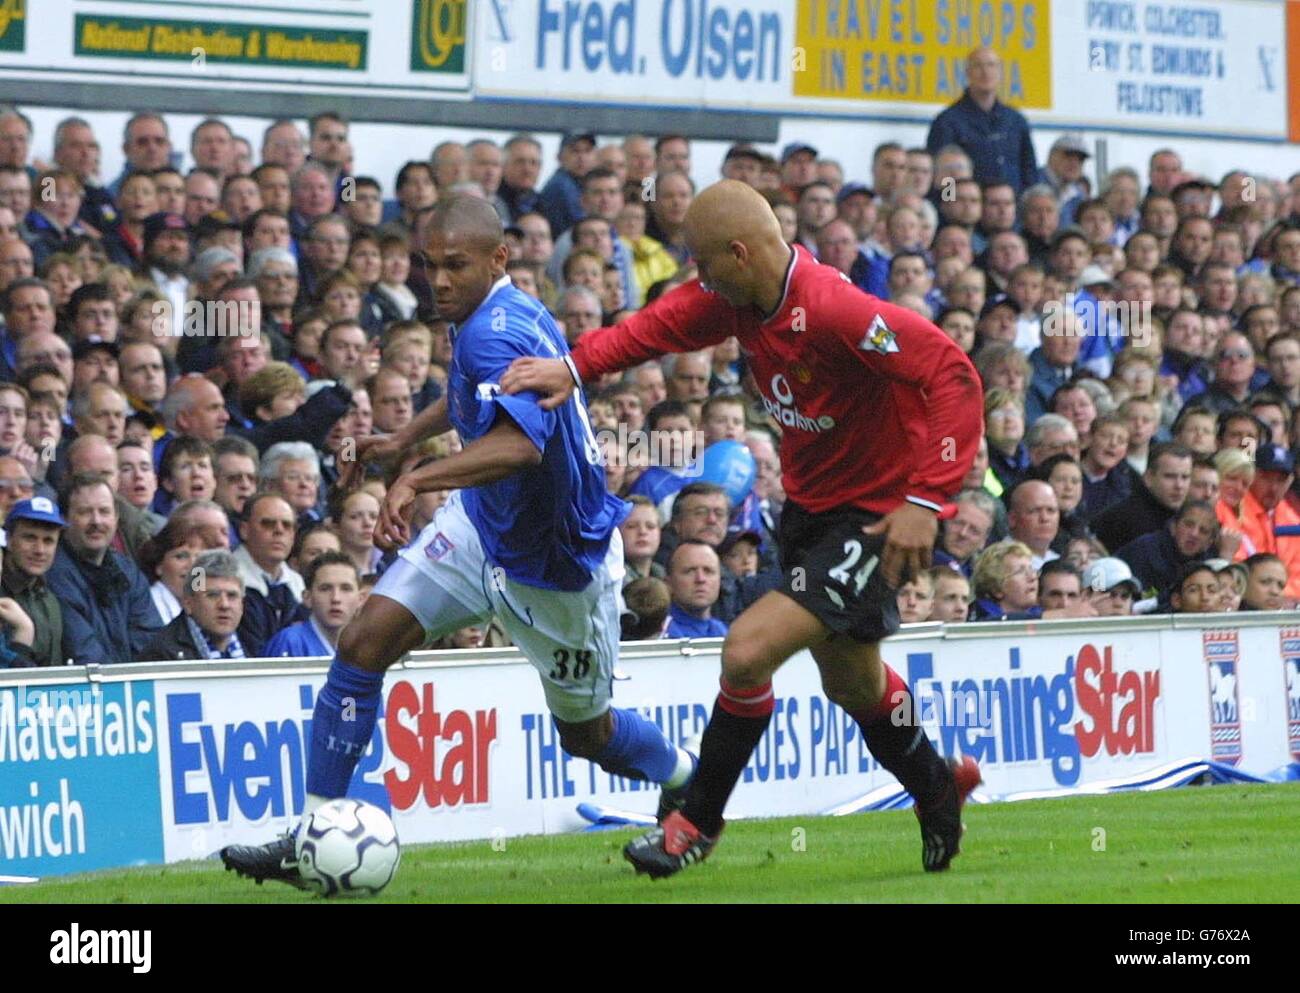 Ipswich Town's Marcus Bent (left) comes under pressure from Manchester United's Wes Brown, during their FA Barclaycard Premiership match at Portman Road. Stock Photo